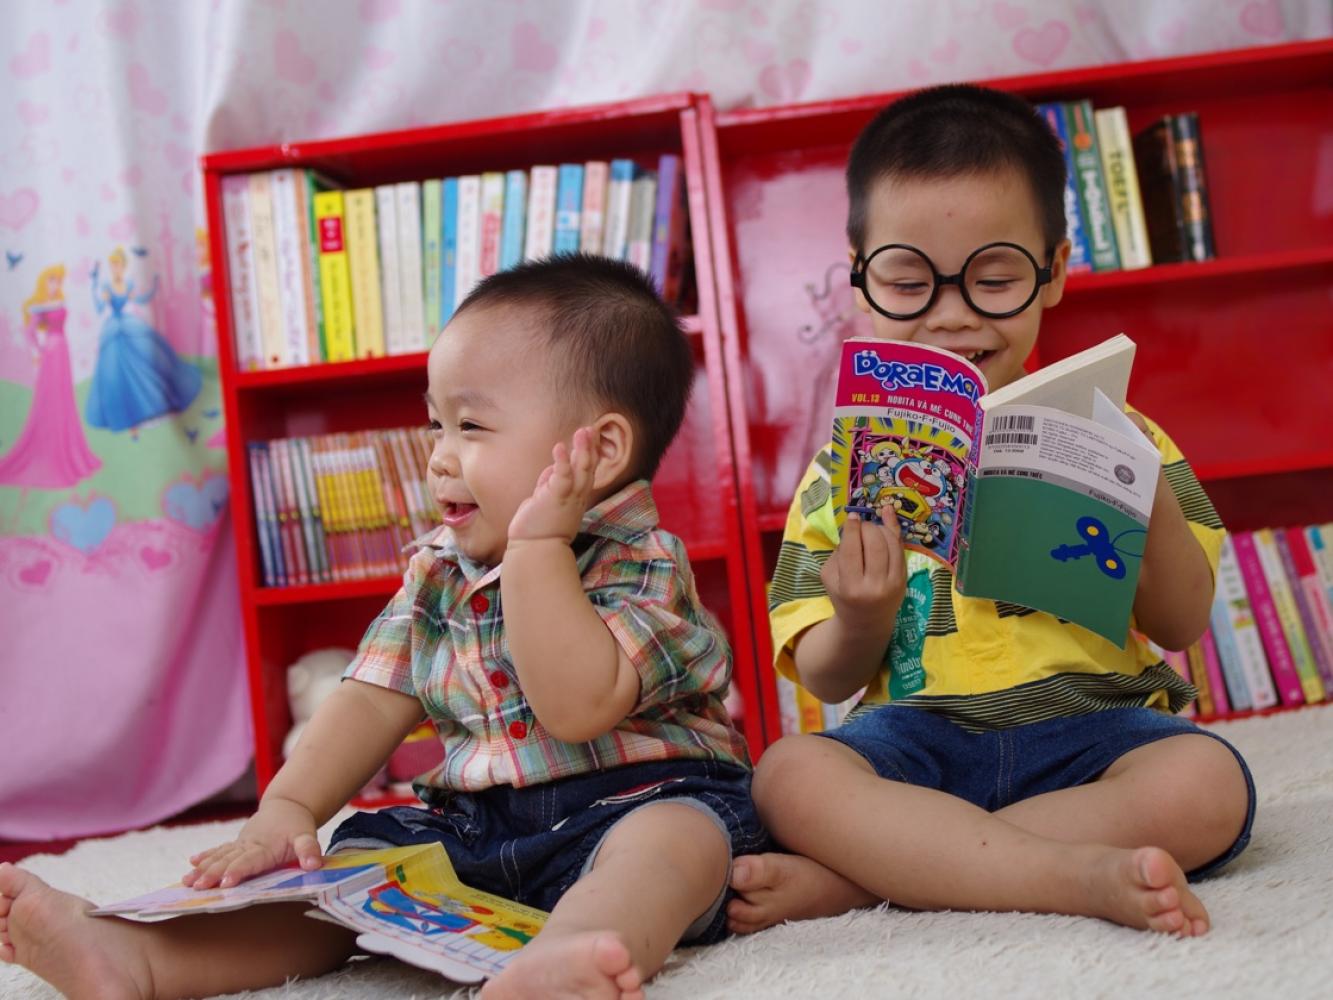 Two youngsters sit on a carpet they are sounded by colour and books.  They are both joyful with books in their hands.